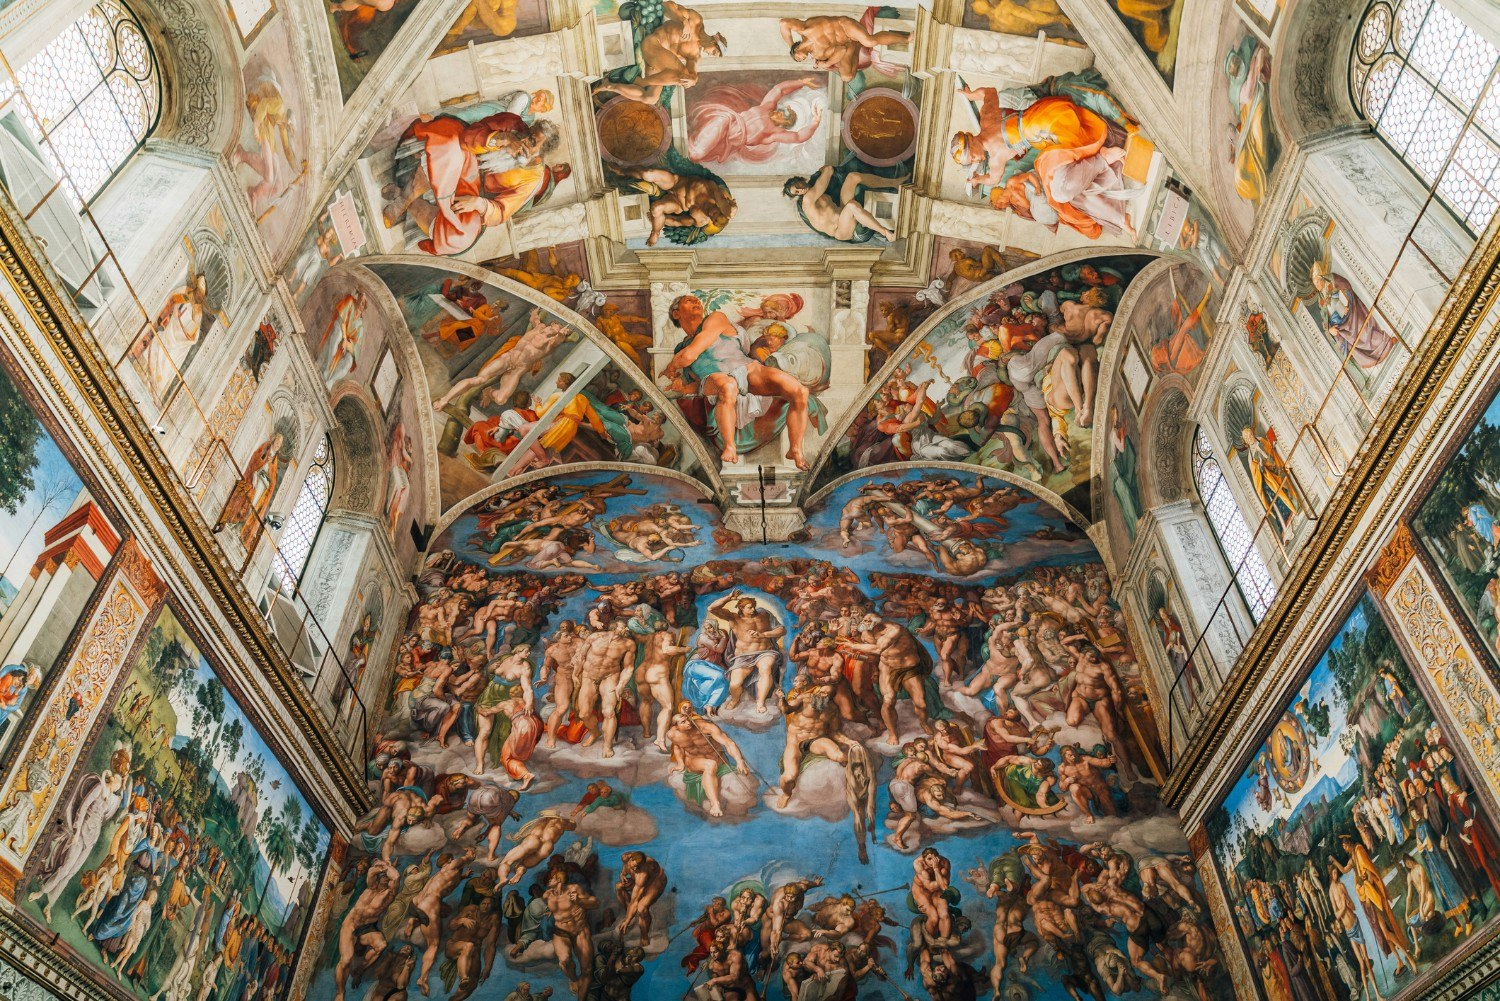 A low angle view of a mural in the Sistine Chapel with people looking at it